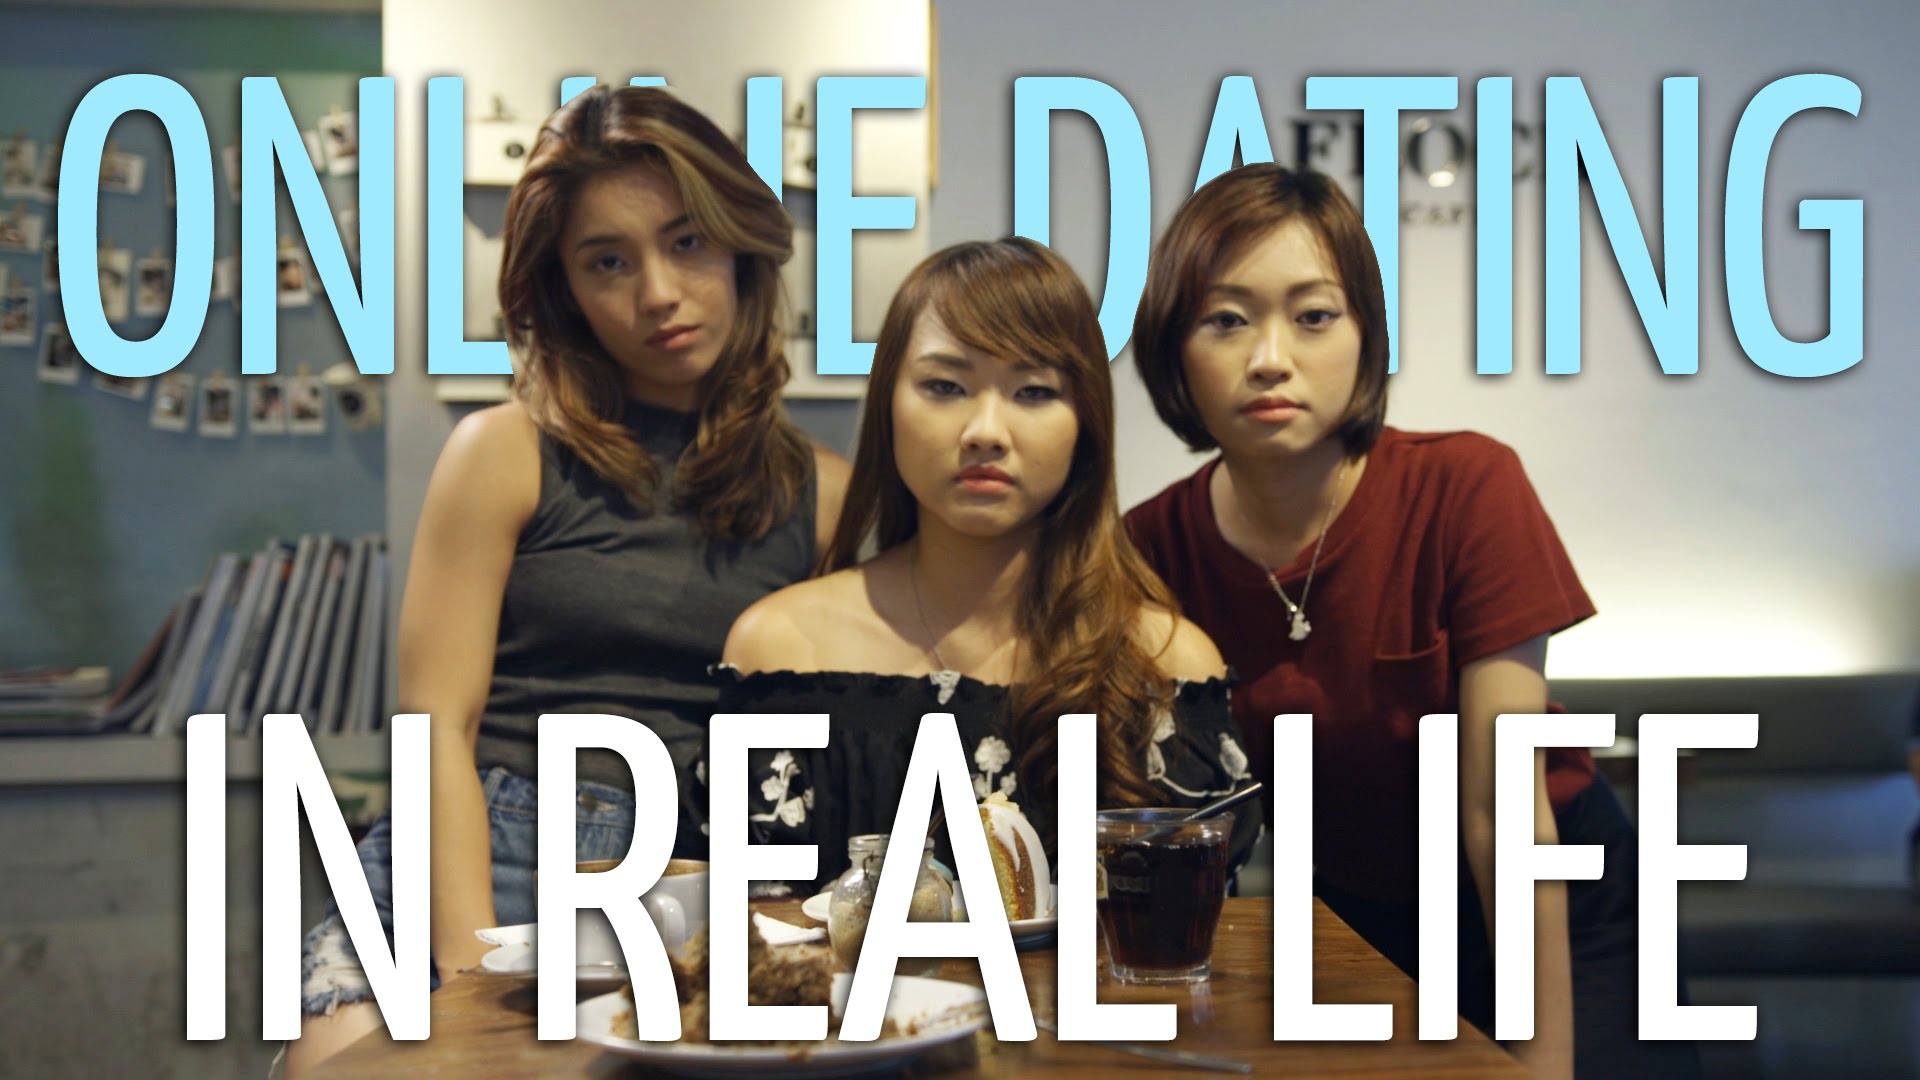 Online dating in real life? Singapore style!